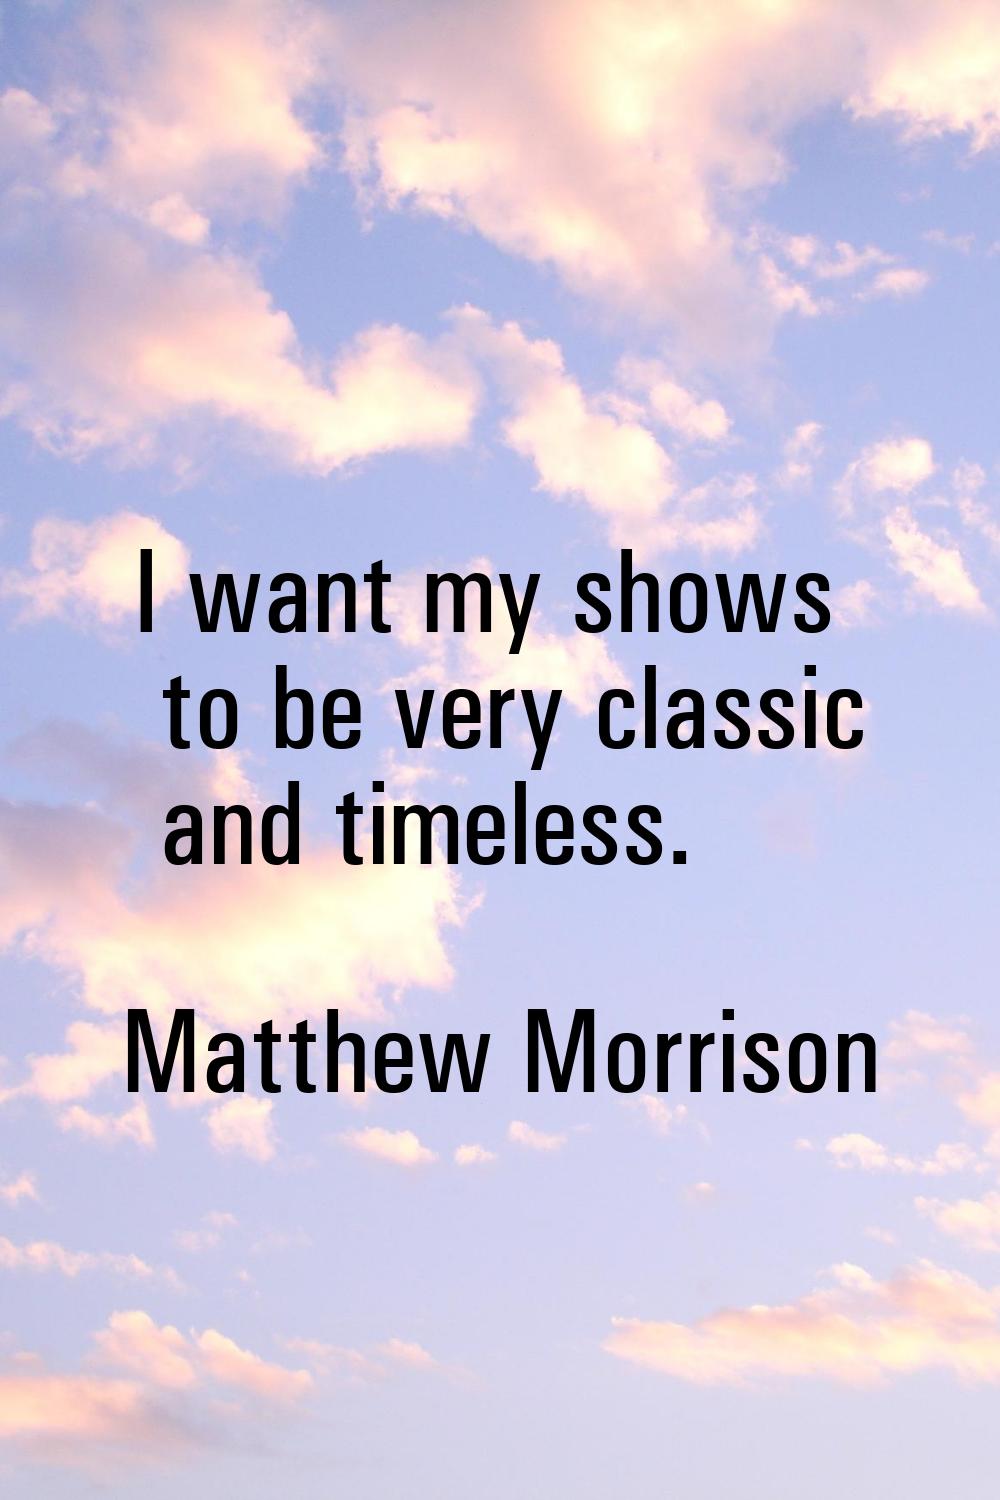 I want my shows to be very classic and timeless.